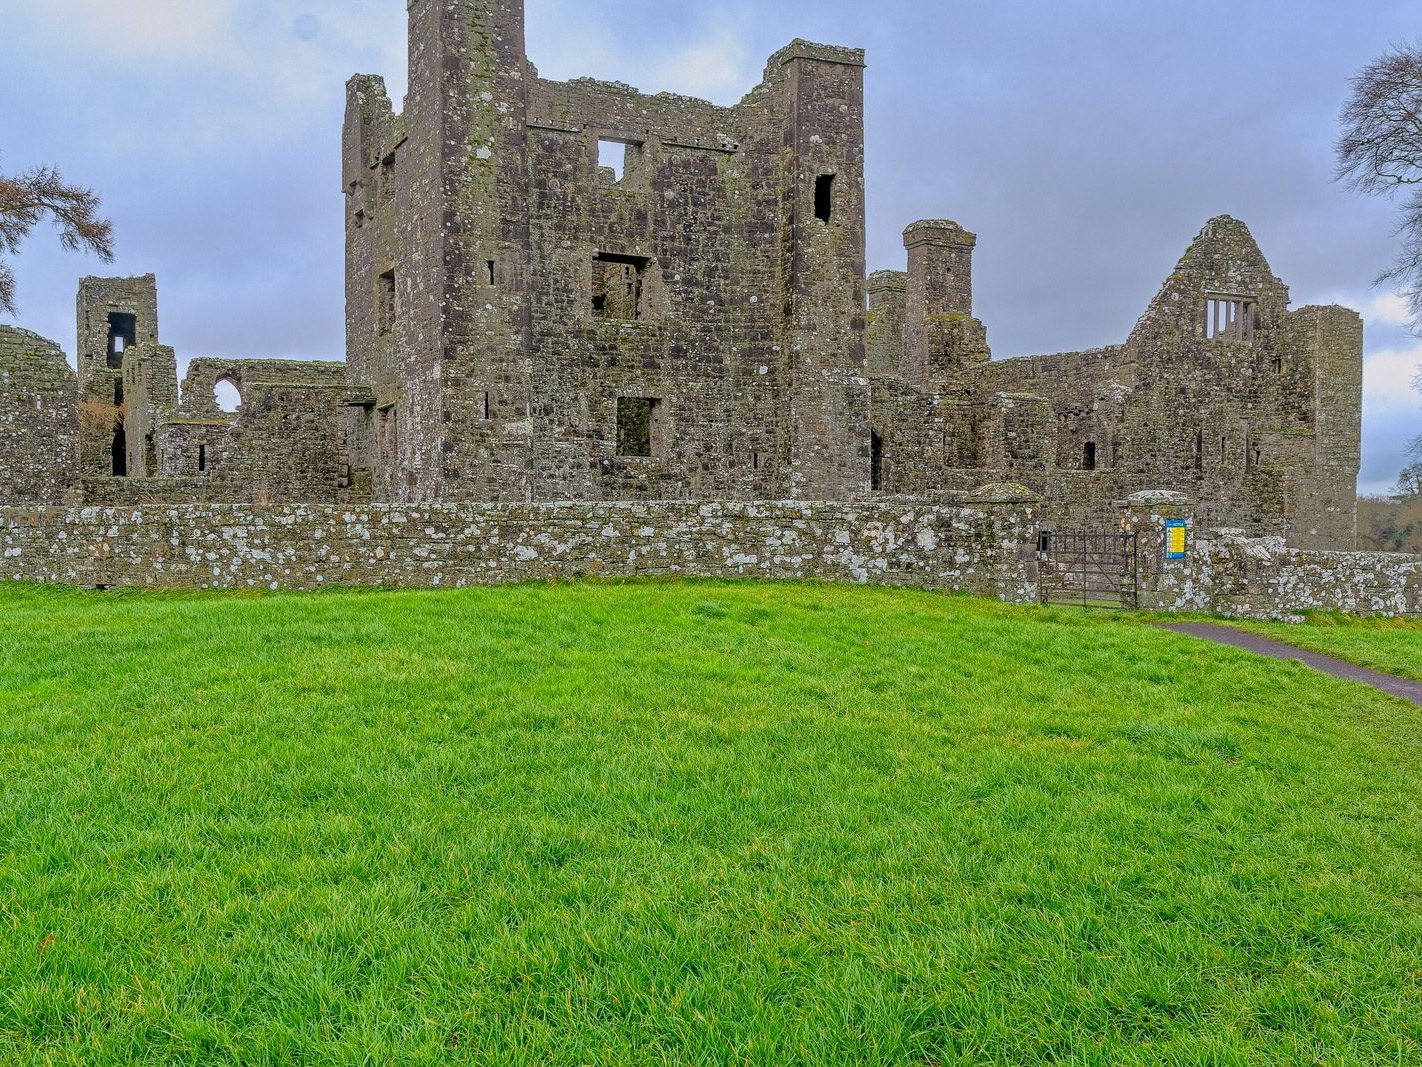 BECTIVE ABBEY WHICH I VISITED LAST CHRISTMAS [THERE WERE NO OTHER VISITORS AS IT WAS A VERY WET DAY]--225208-1